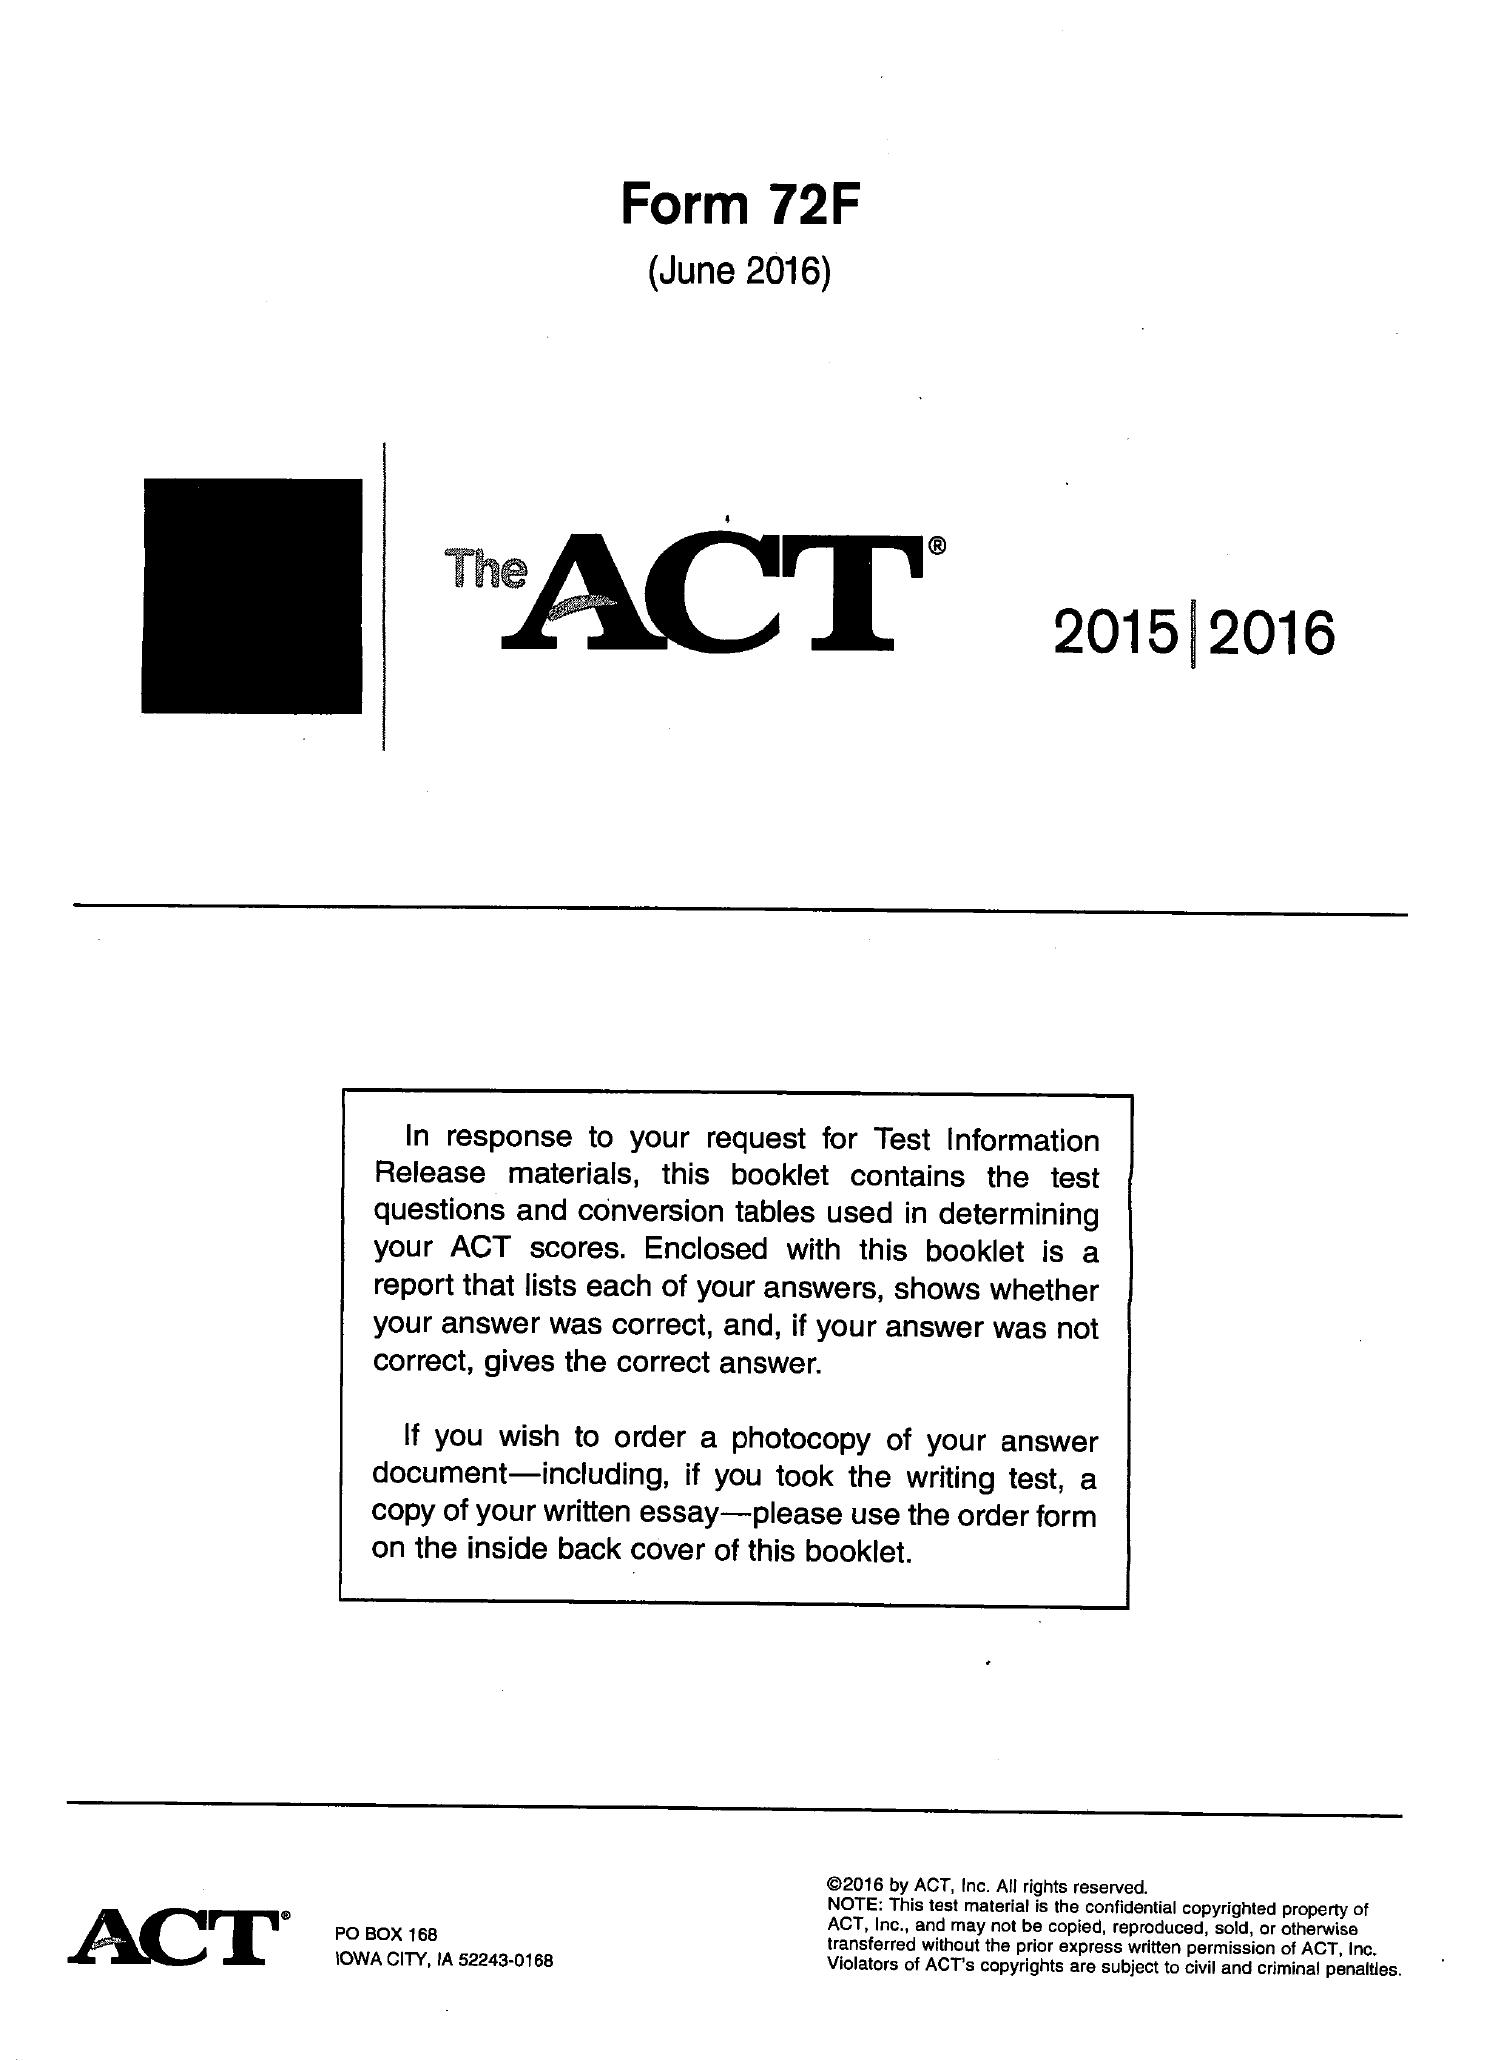 2016 June ACT Form 72F McElroy Tutoring.pdf DocDroid